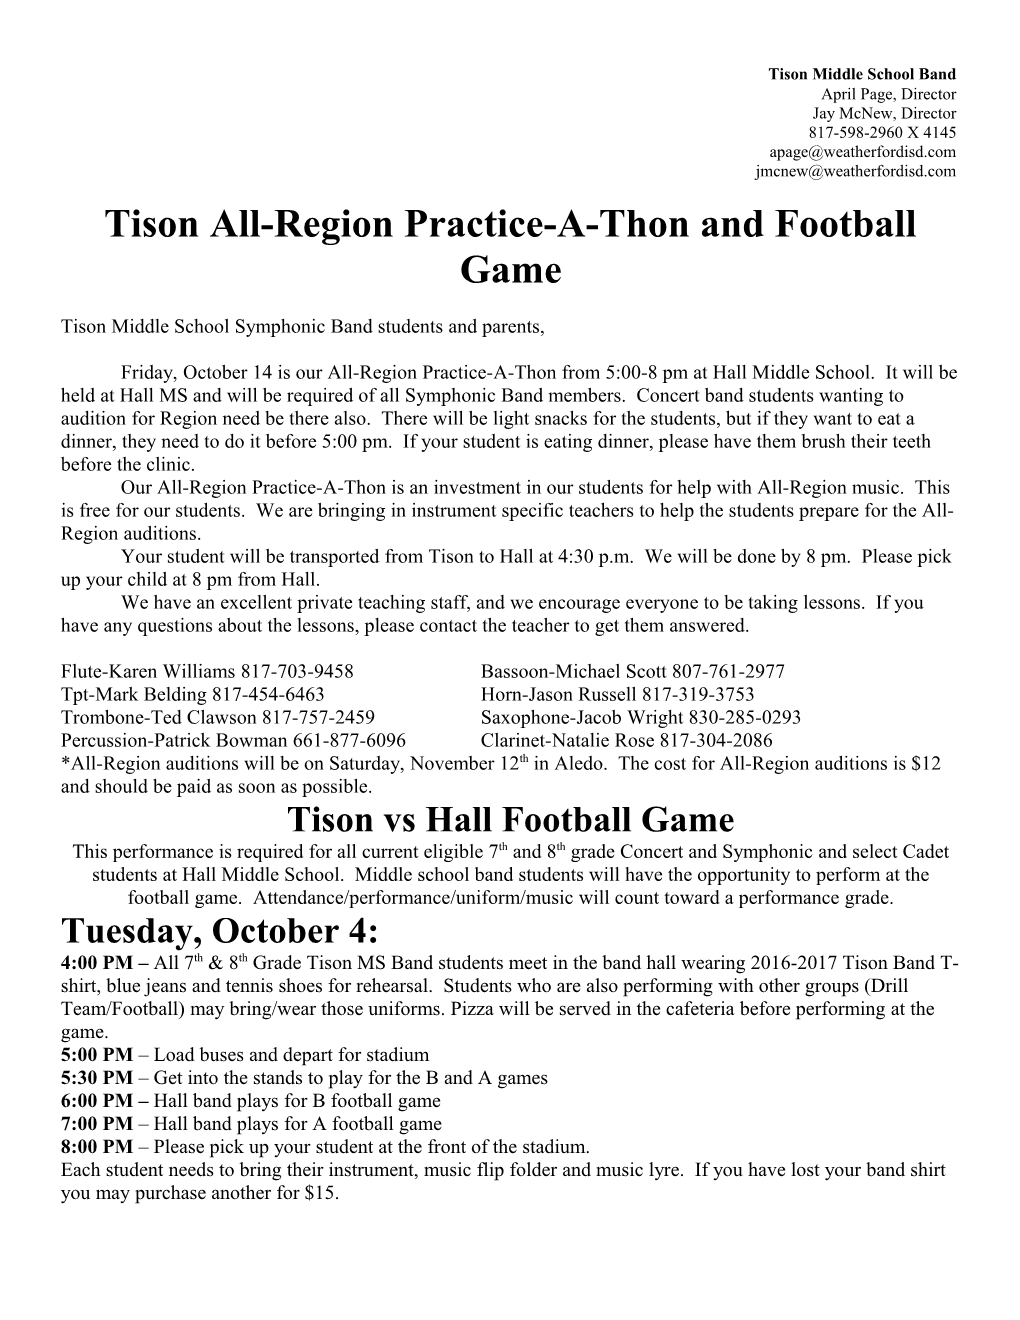 Tison All-Region Practice-A-Thon and Football Game